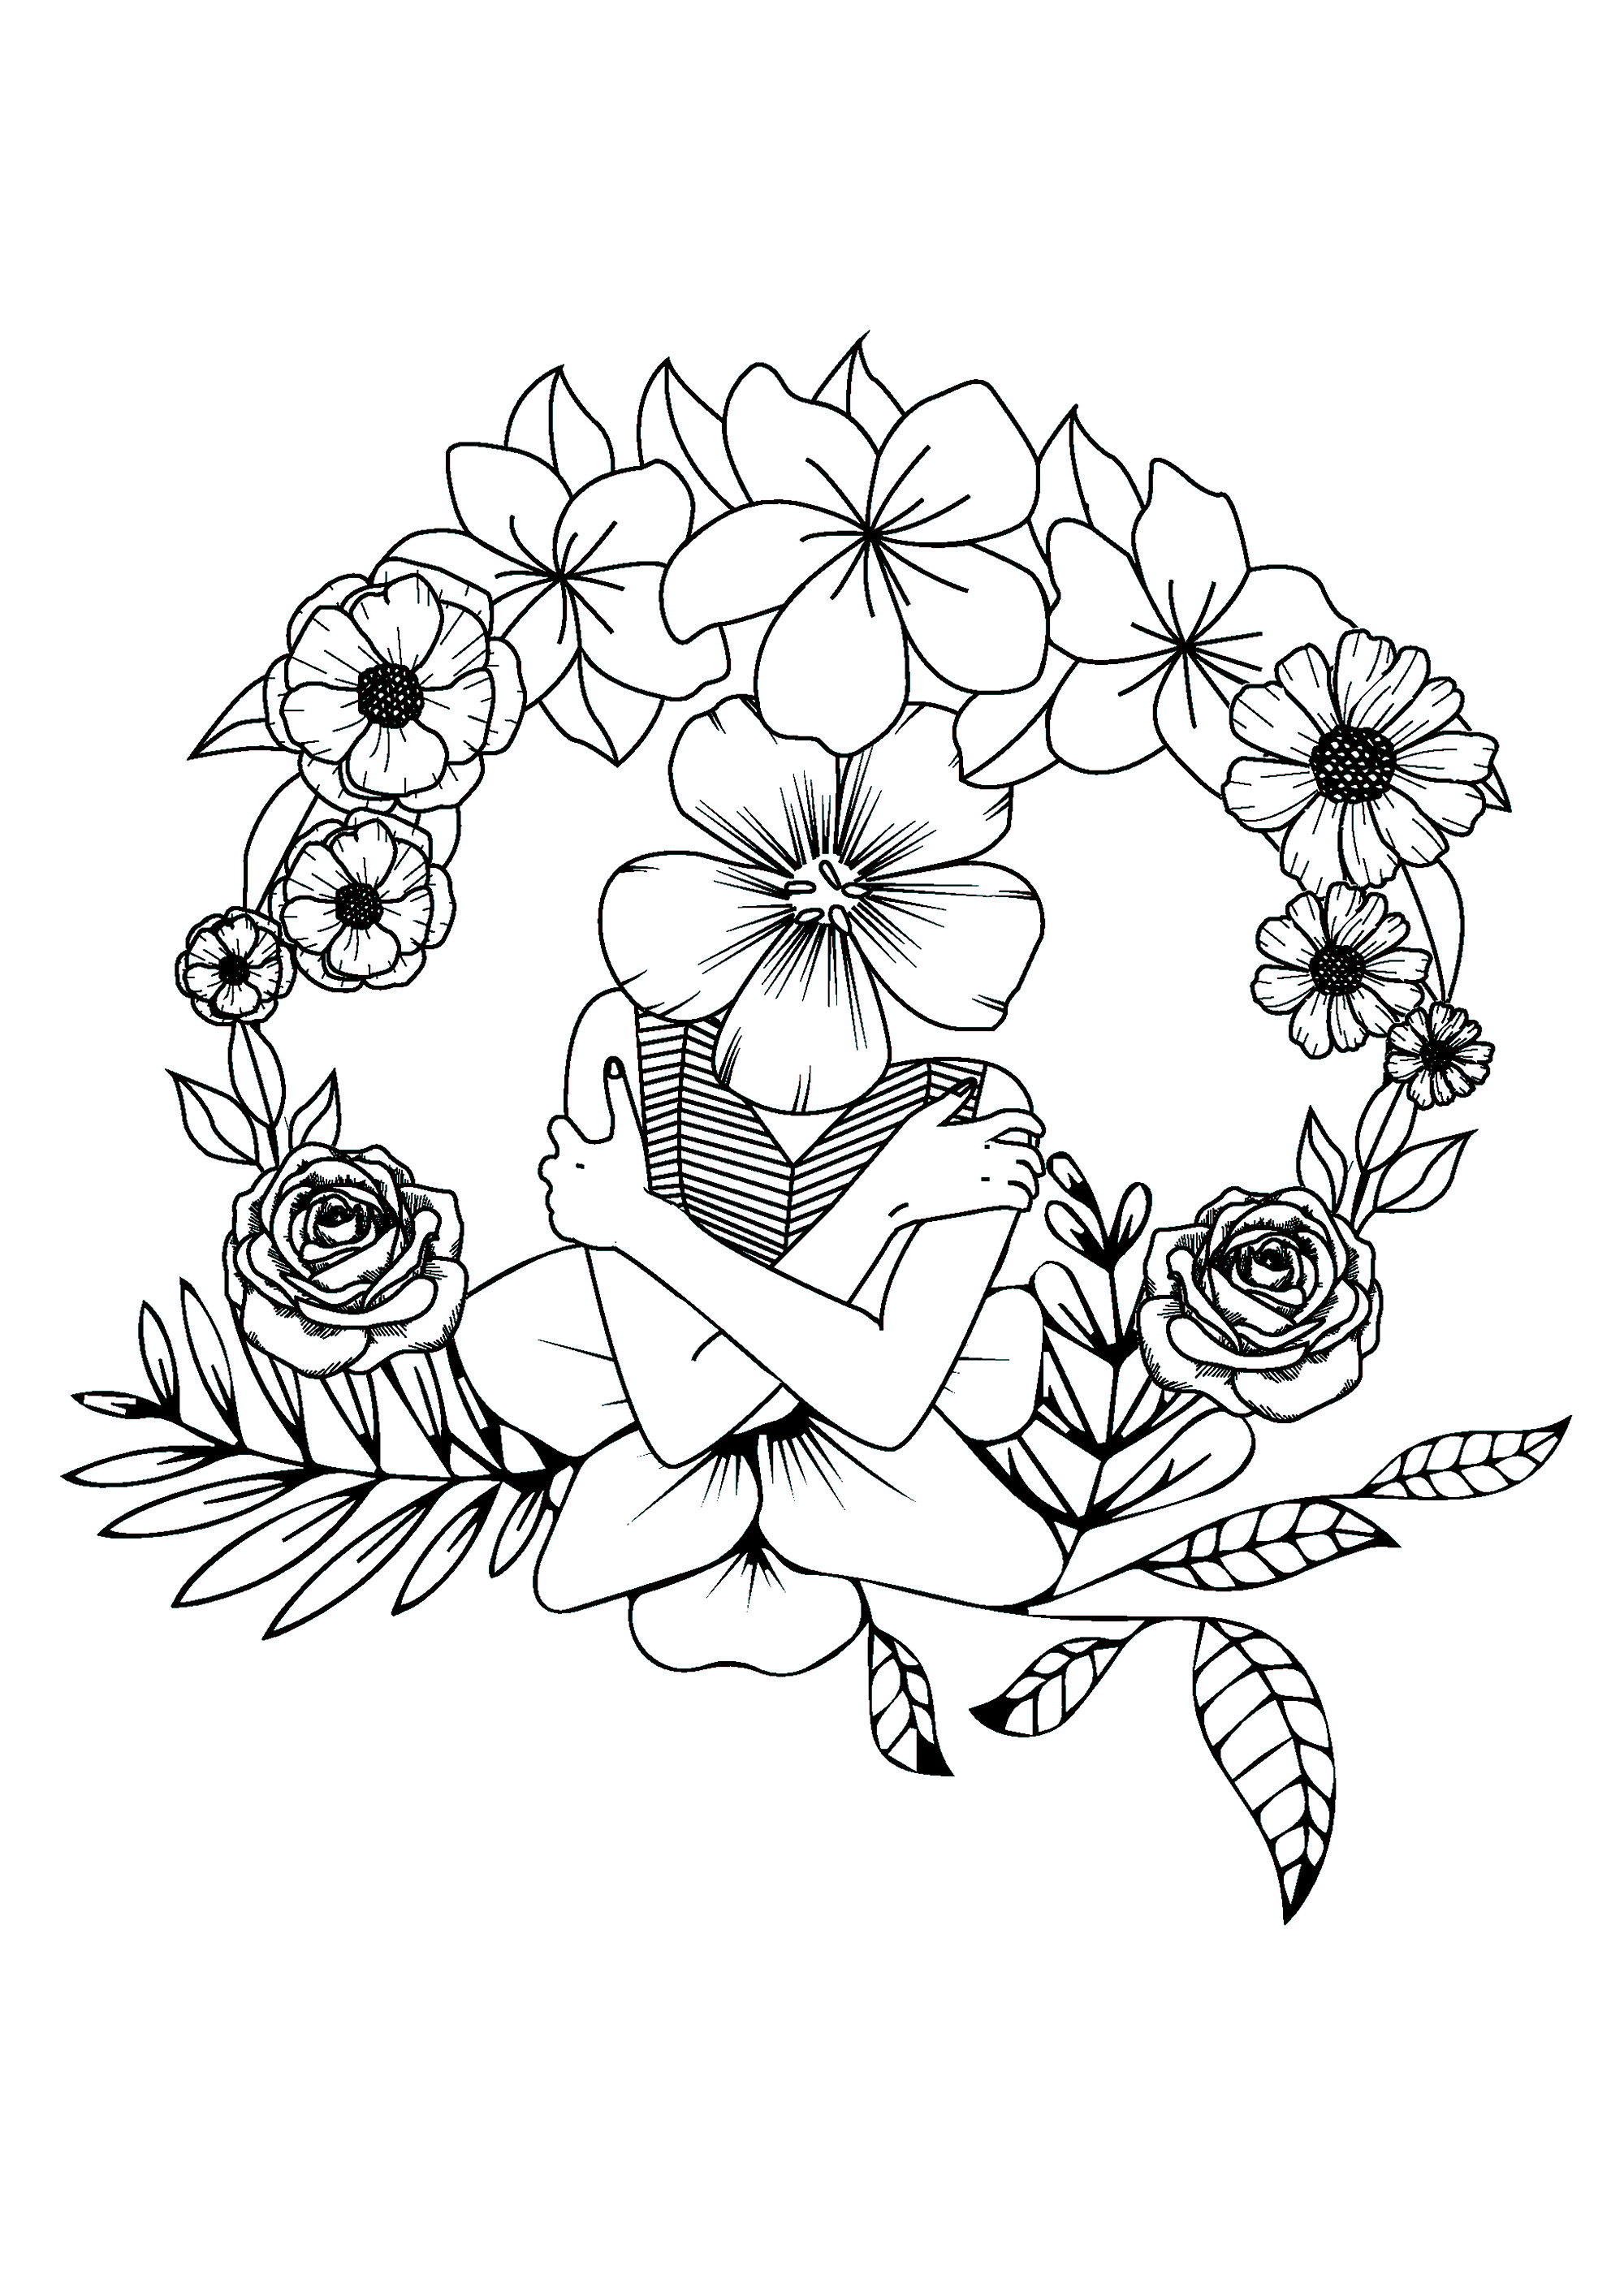 Woman with flower head   Flowers Kids Coloring Pages